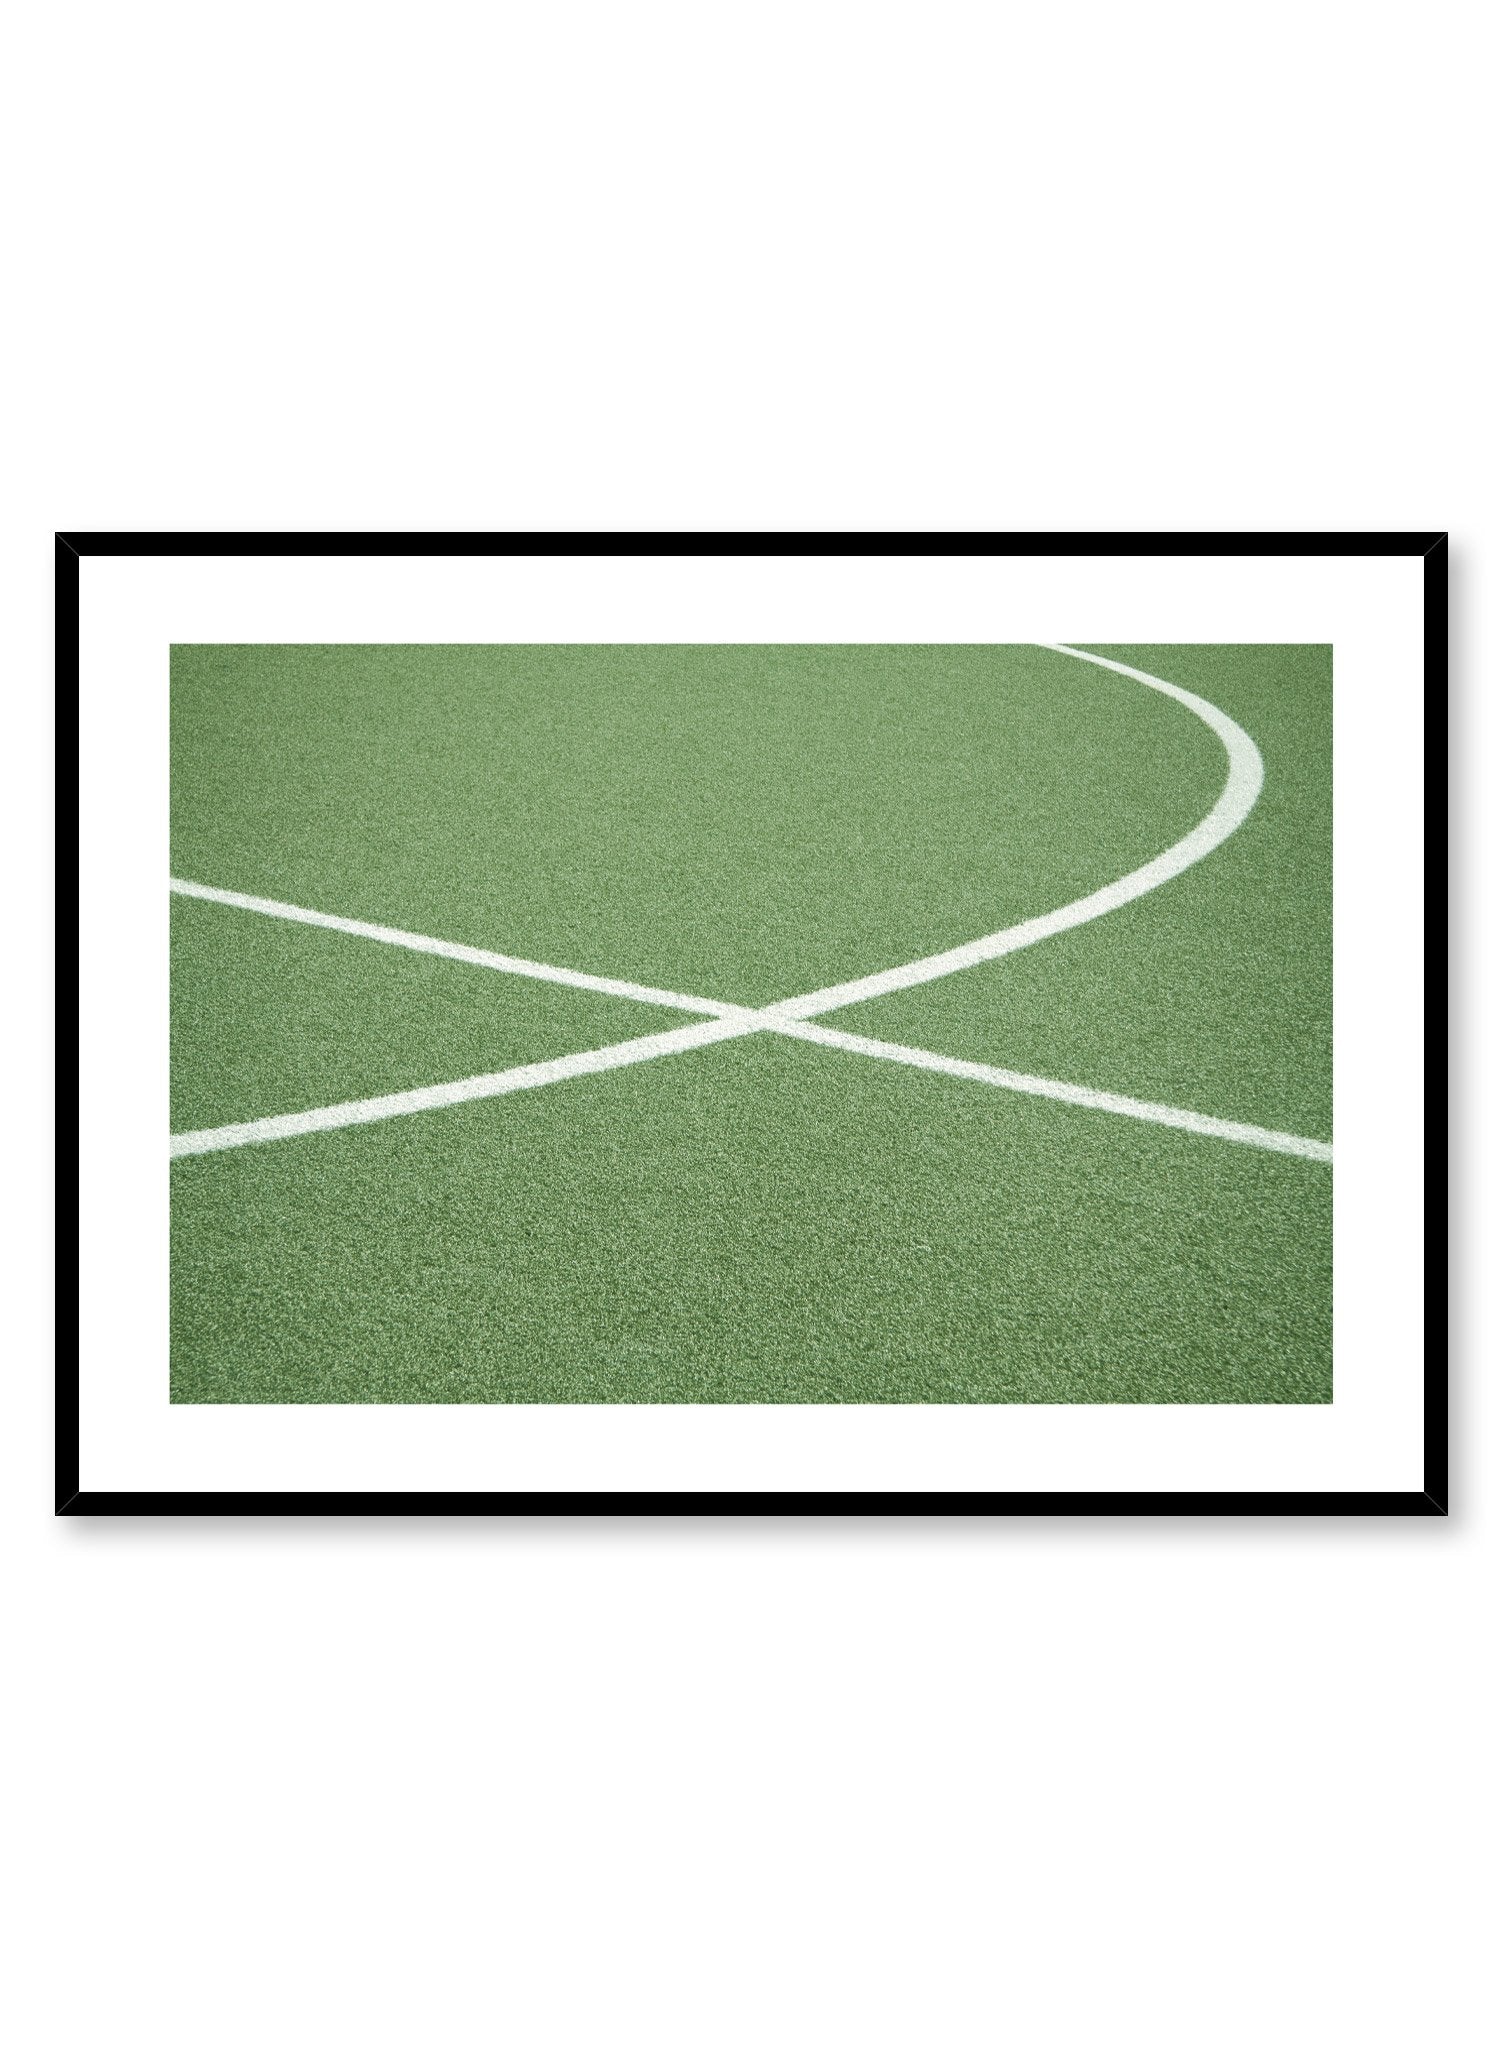 Modern minimalist poster by Opposite Wall with photography of soccer field